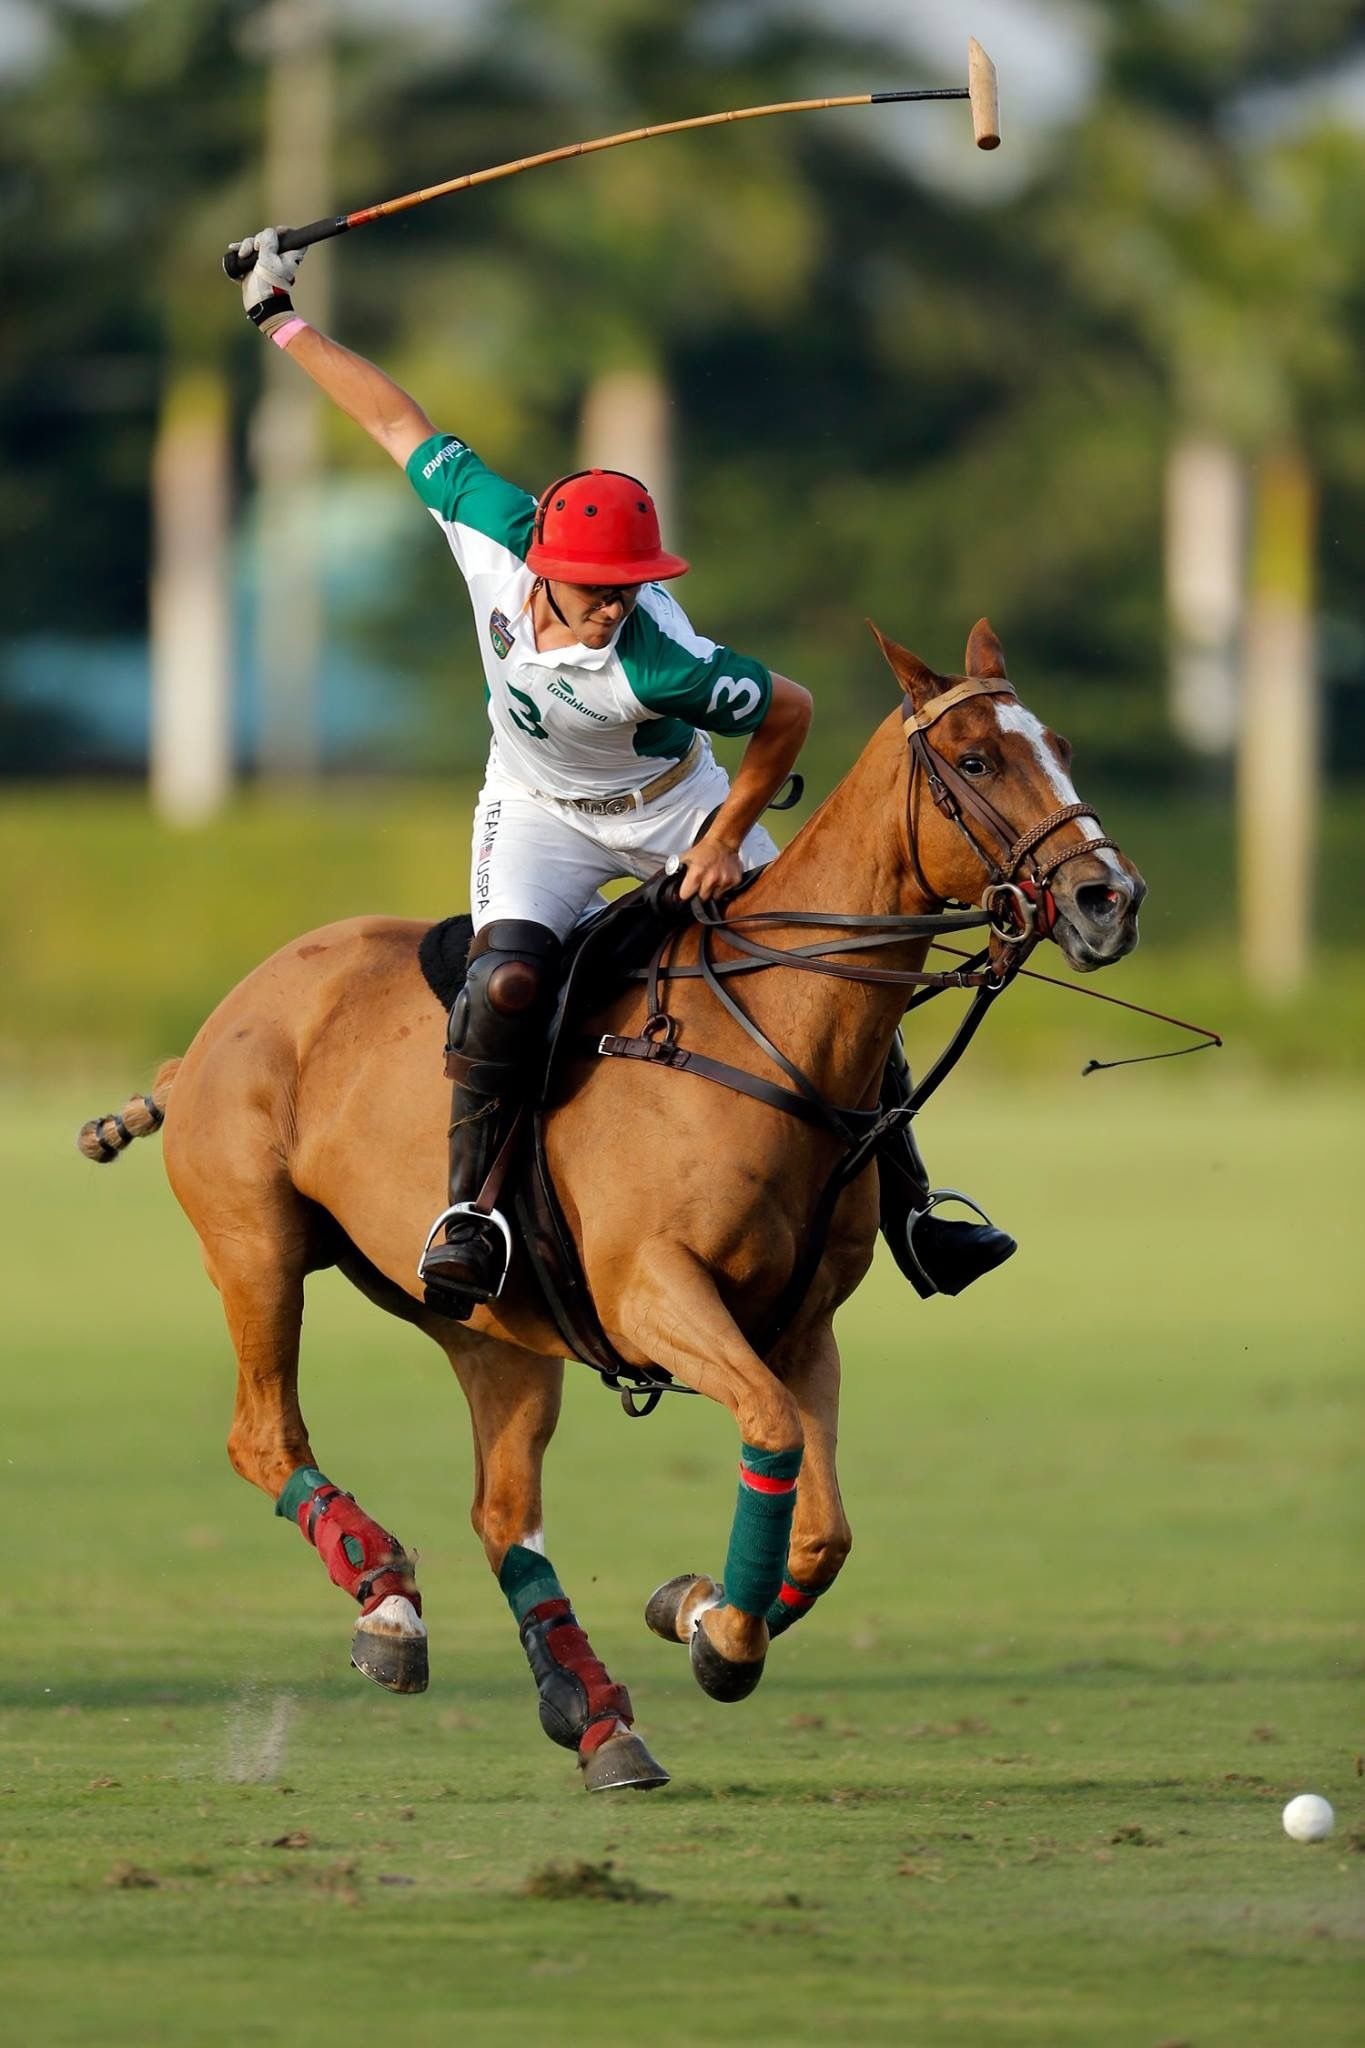 Horse Polo: A player riding a horse and holding a mallet, Action equestrian sports. 1370x2050 HD Background.